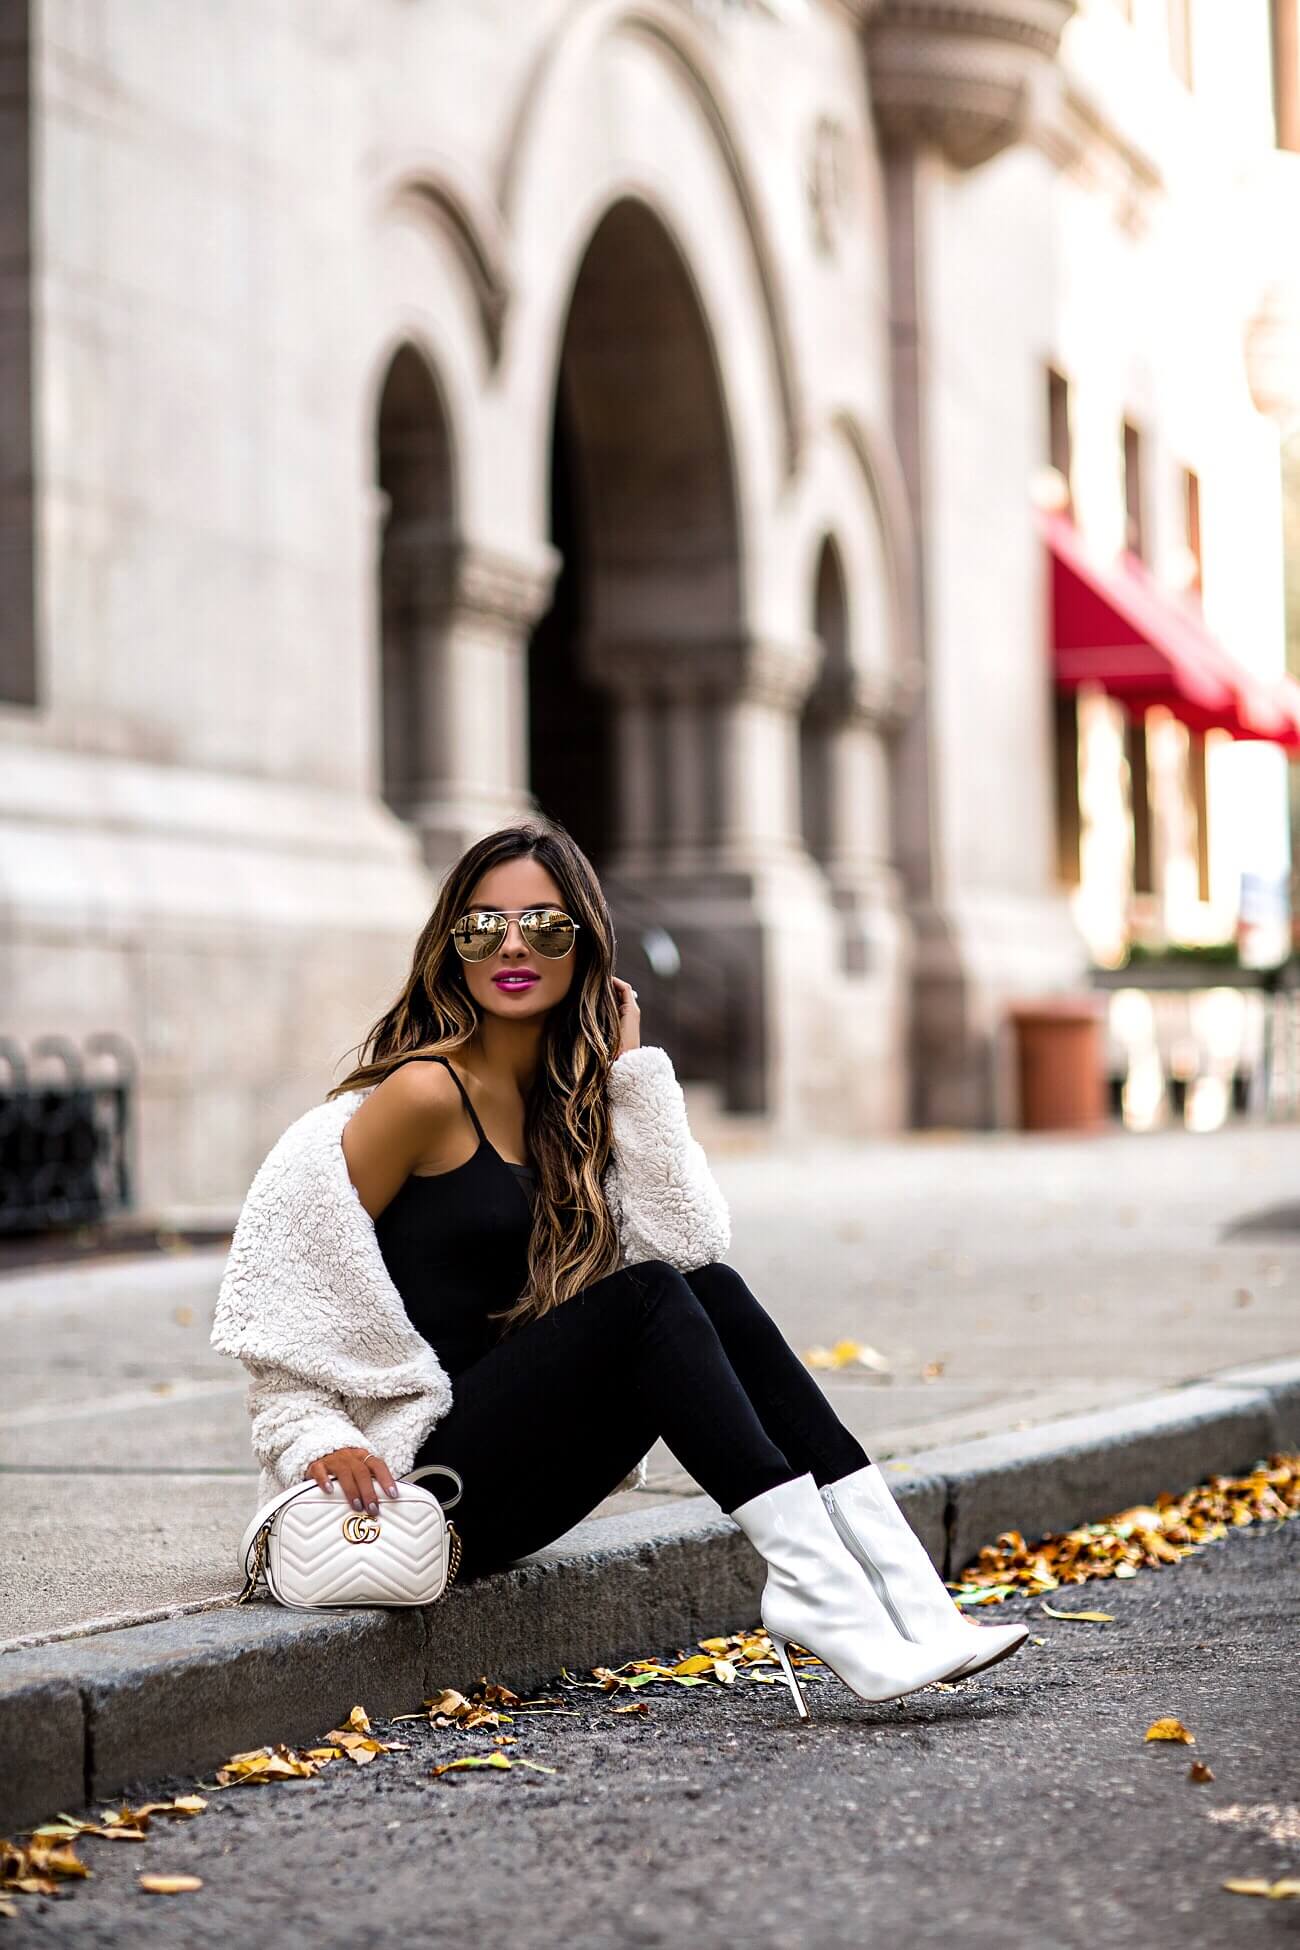 fashion blogger mia mia mine wearing a white fuzzy jacket and white booties by steve madden